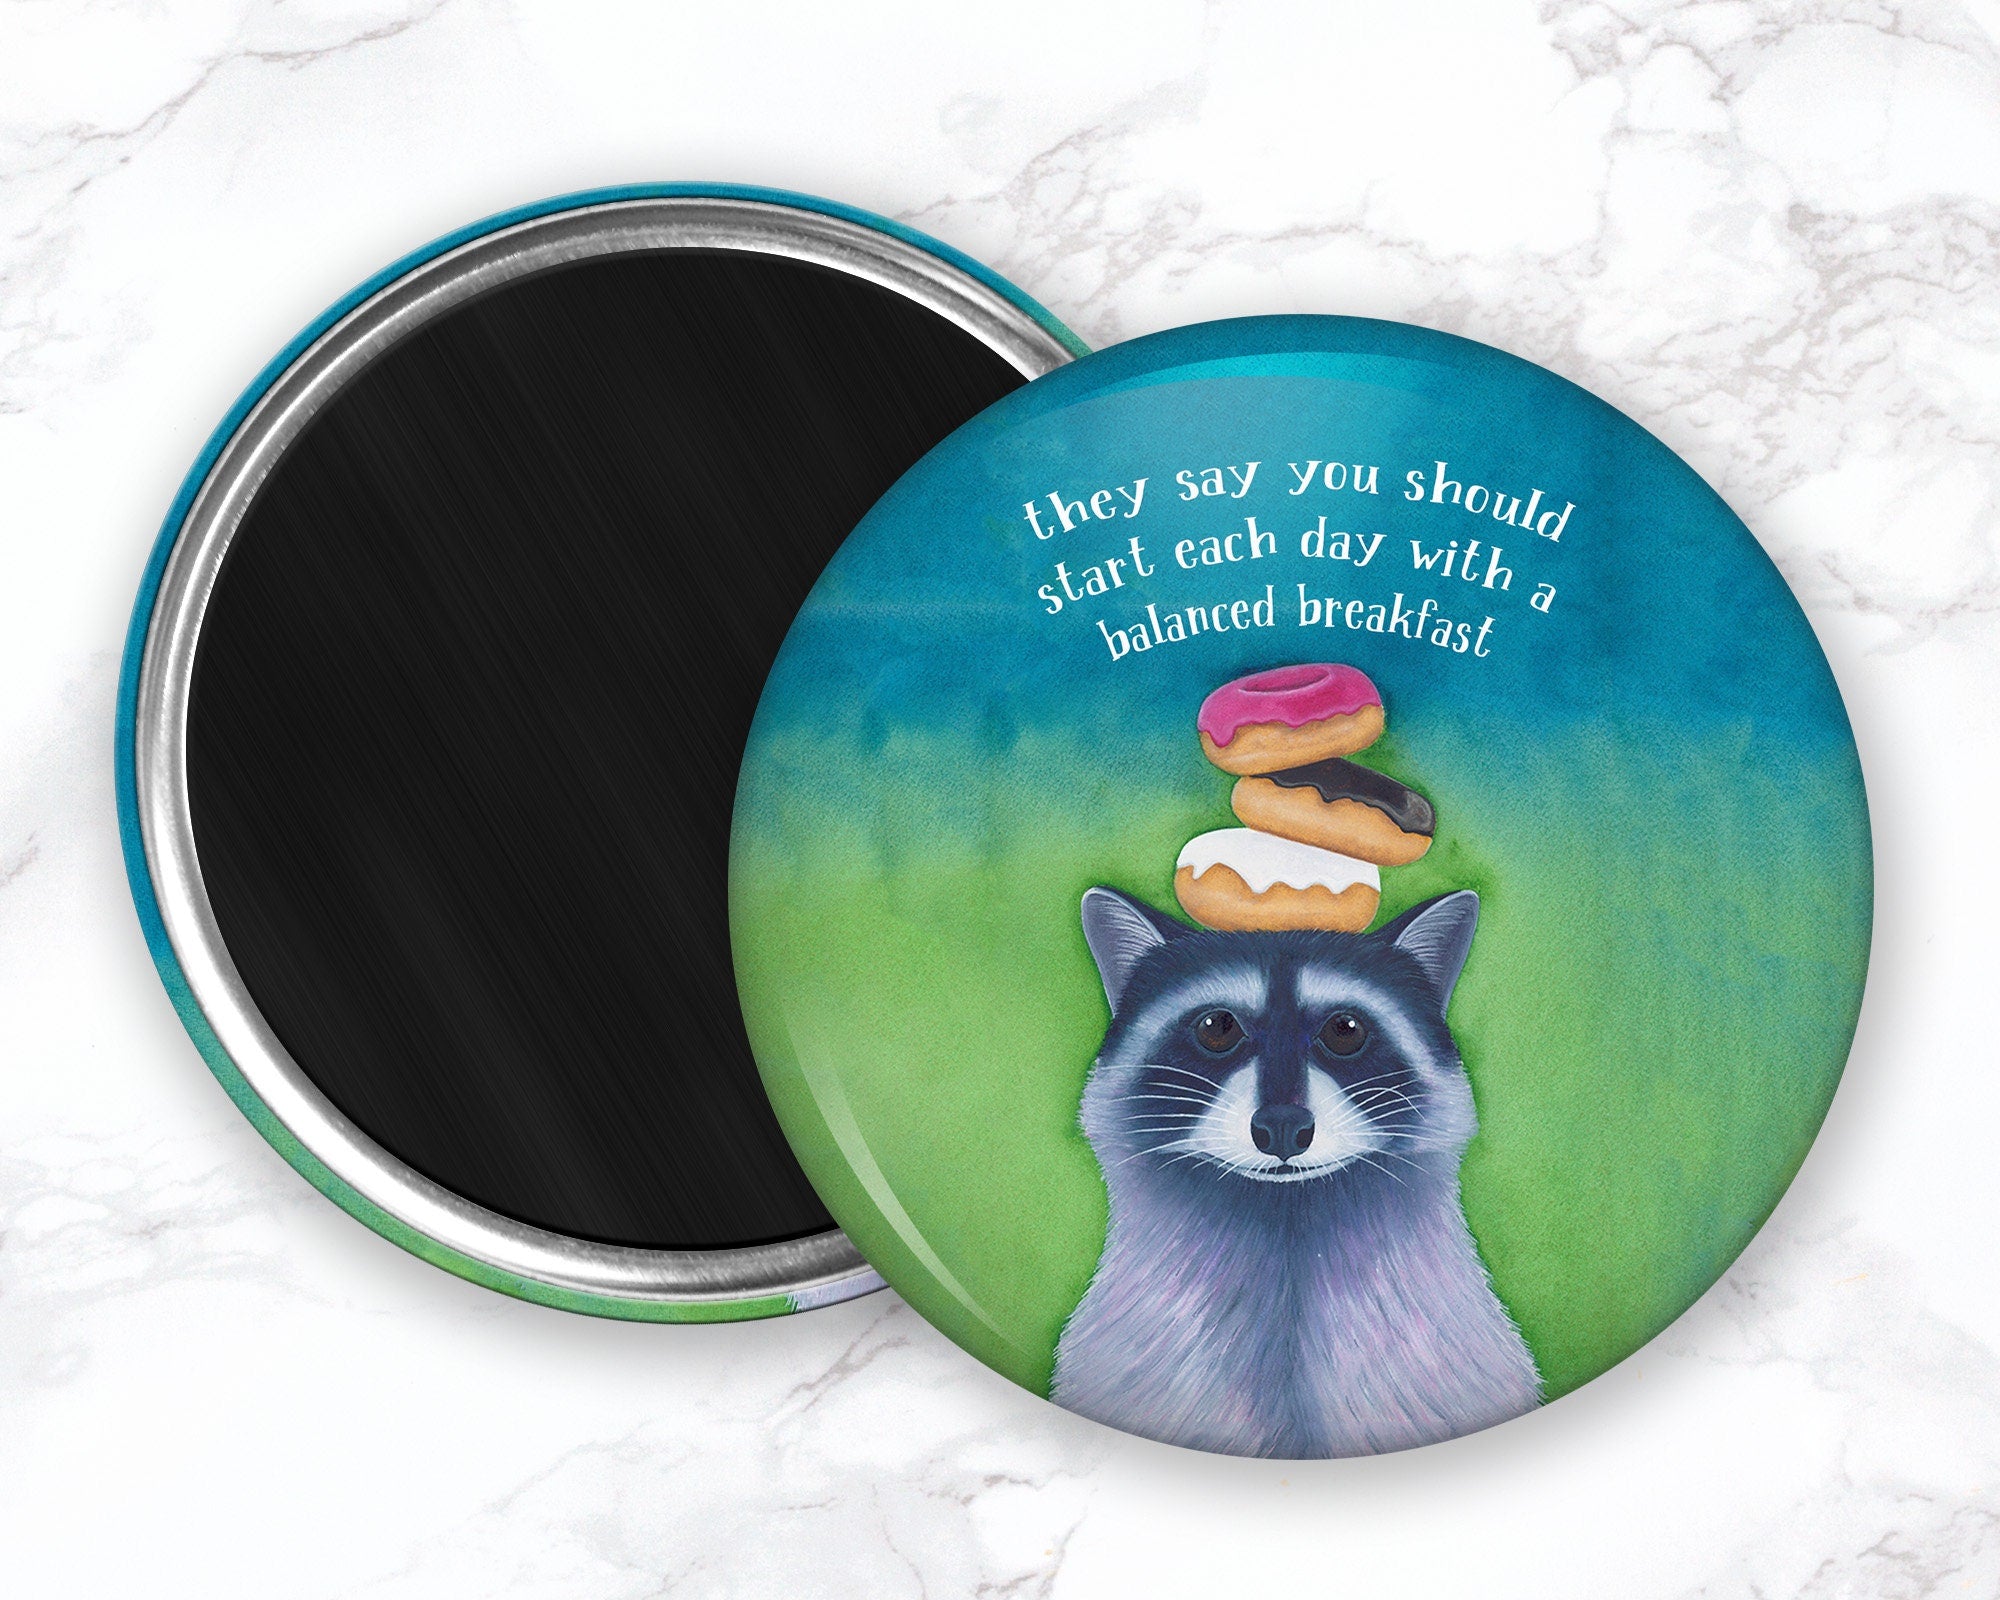 Funny Raccoon Magent, Funny Donut Magnet, Refrigerator Magnets, Funny Kitchen Magnet, Food Magnets, Woodland Animal Magnets